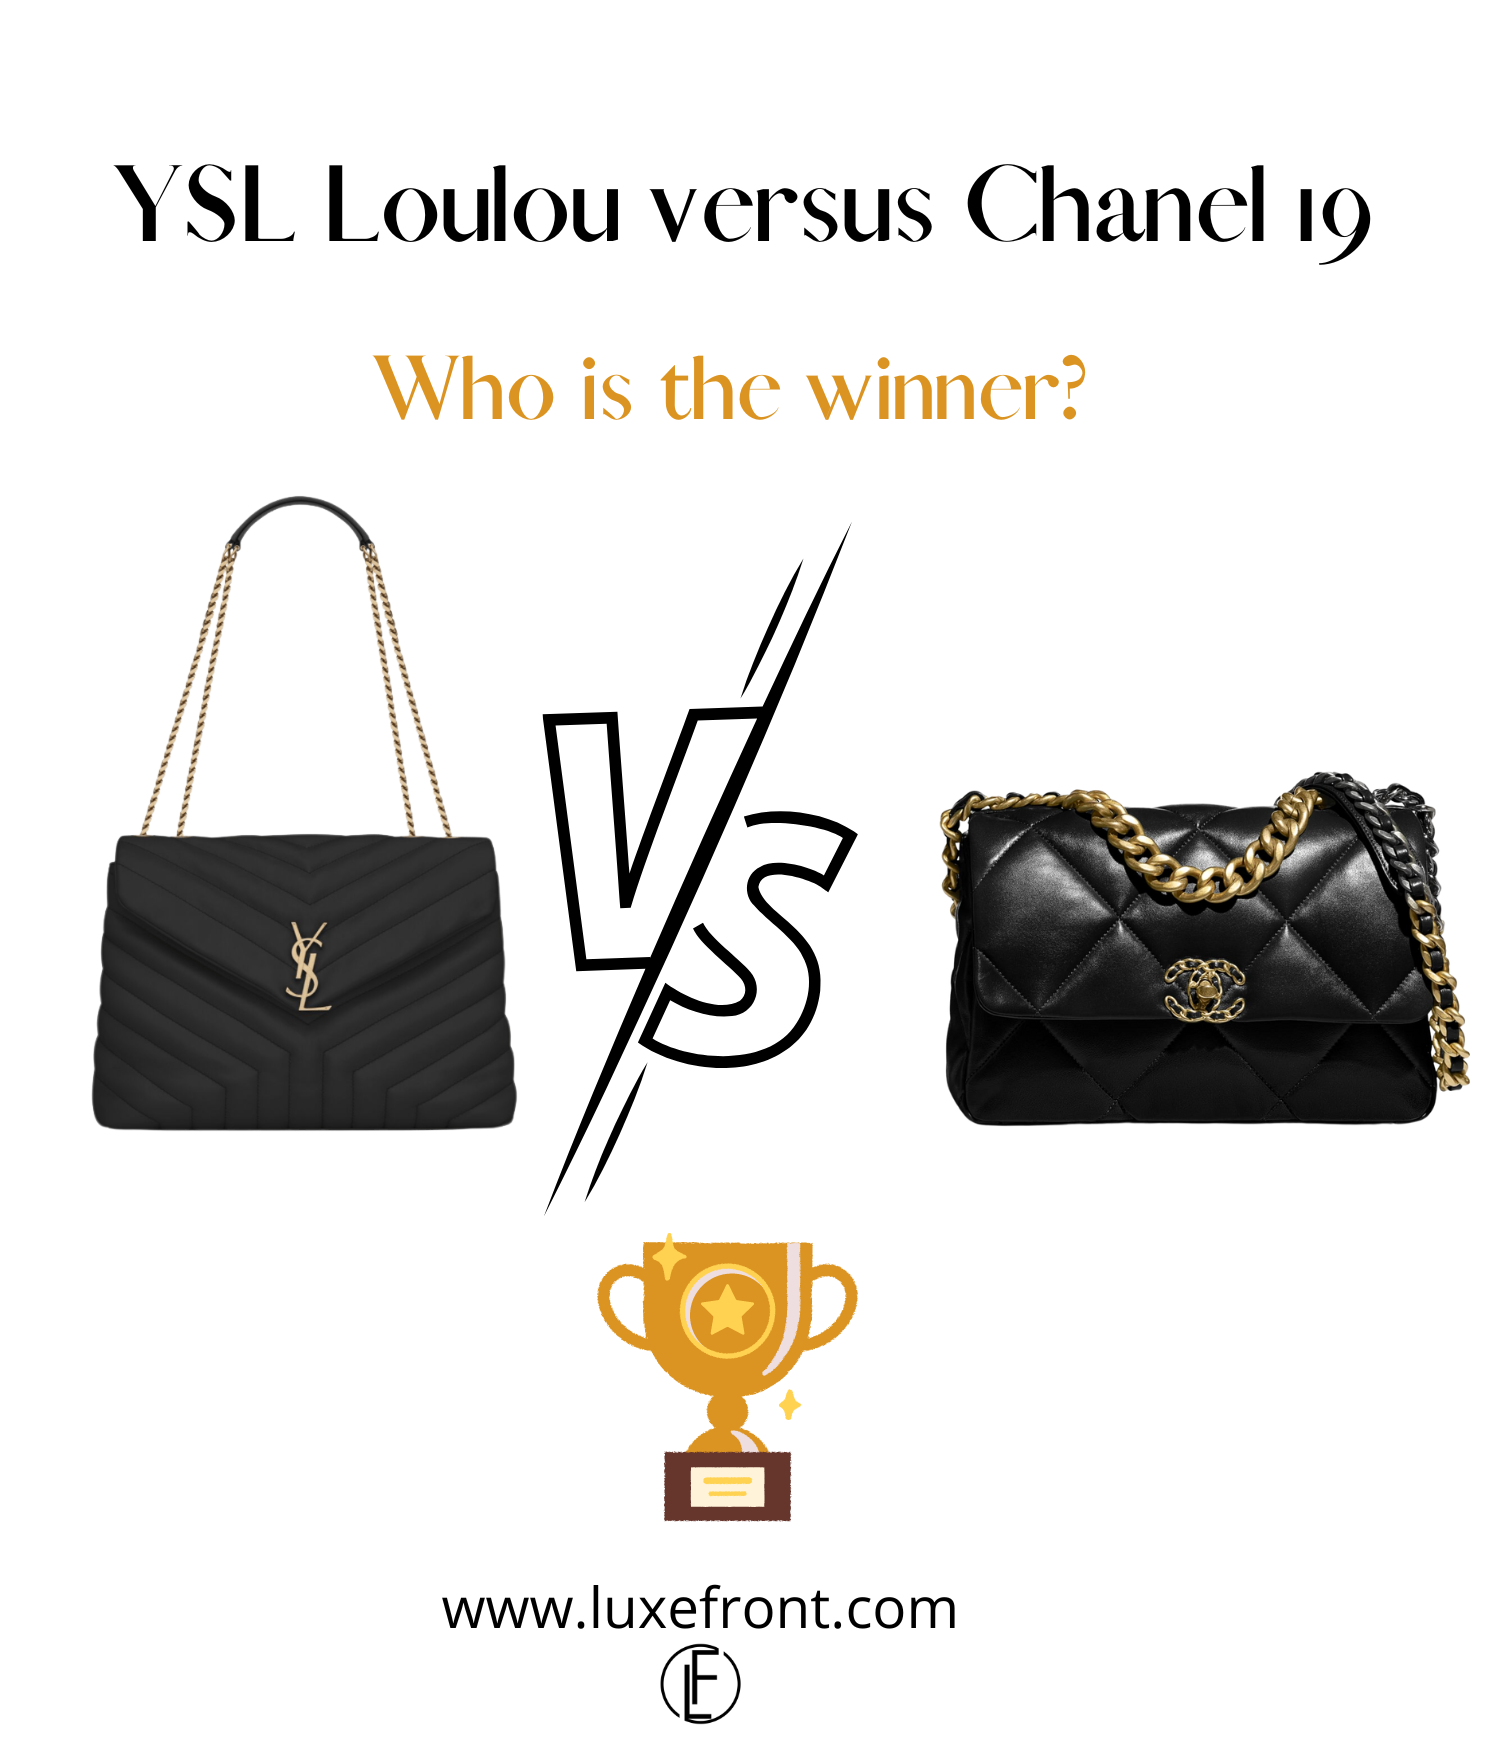 YSL Loulou versus the Chanel 19